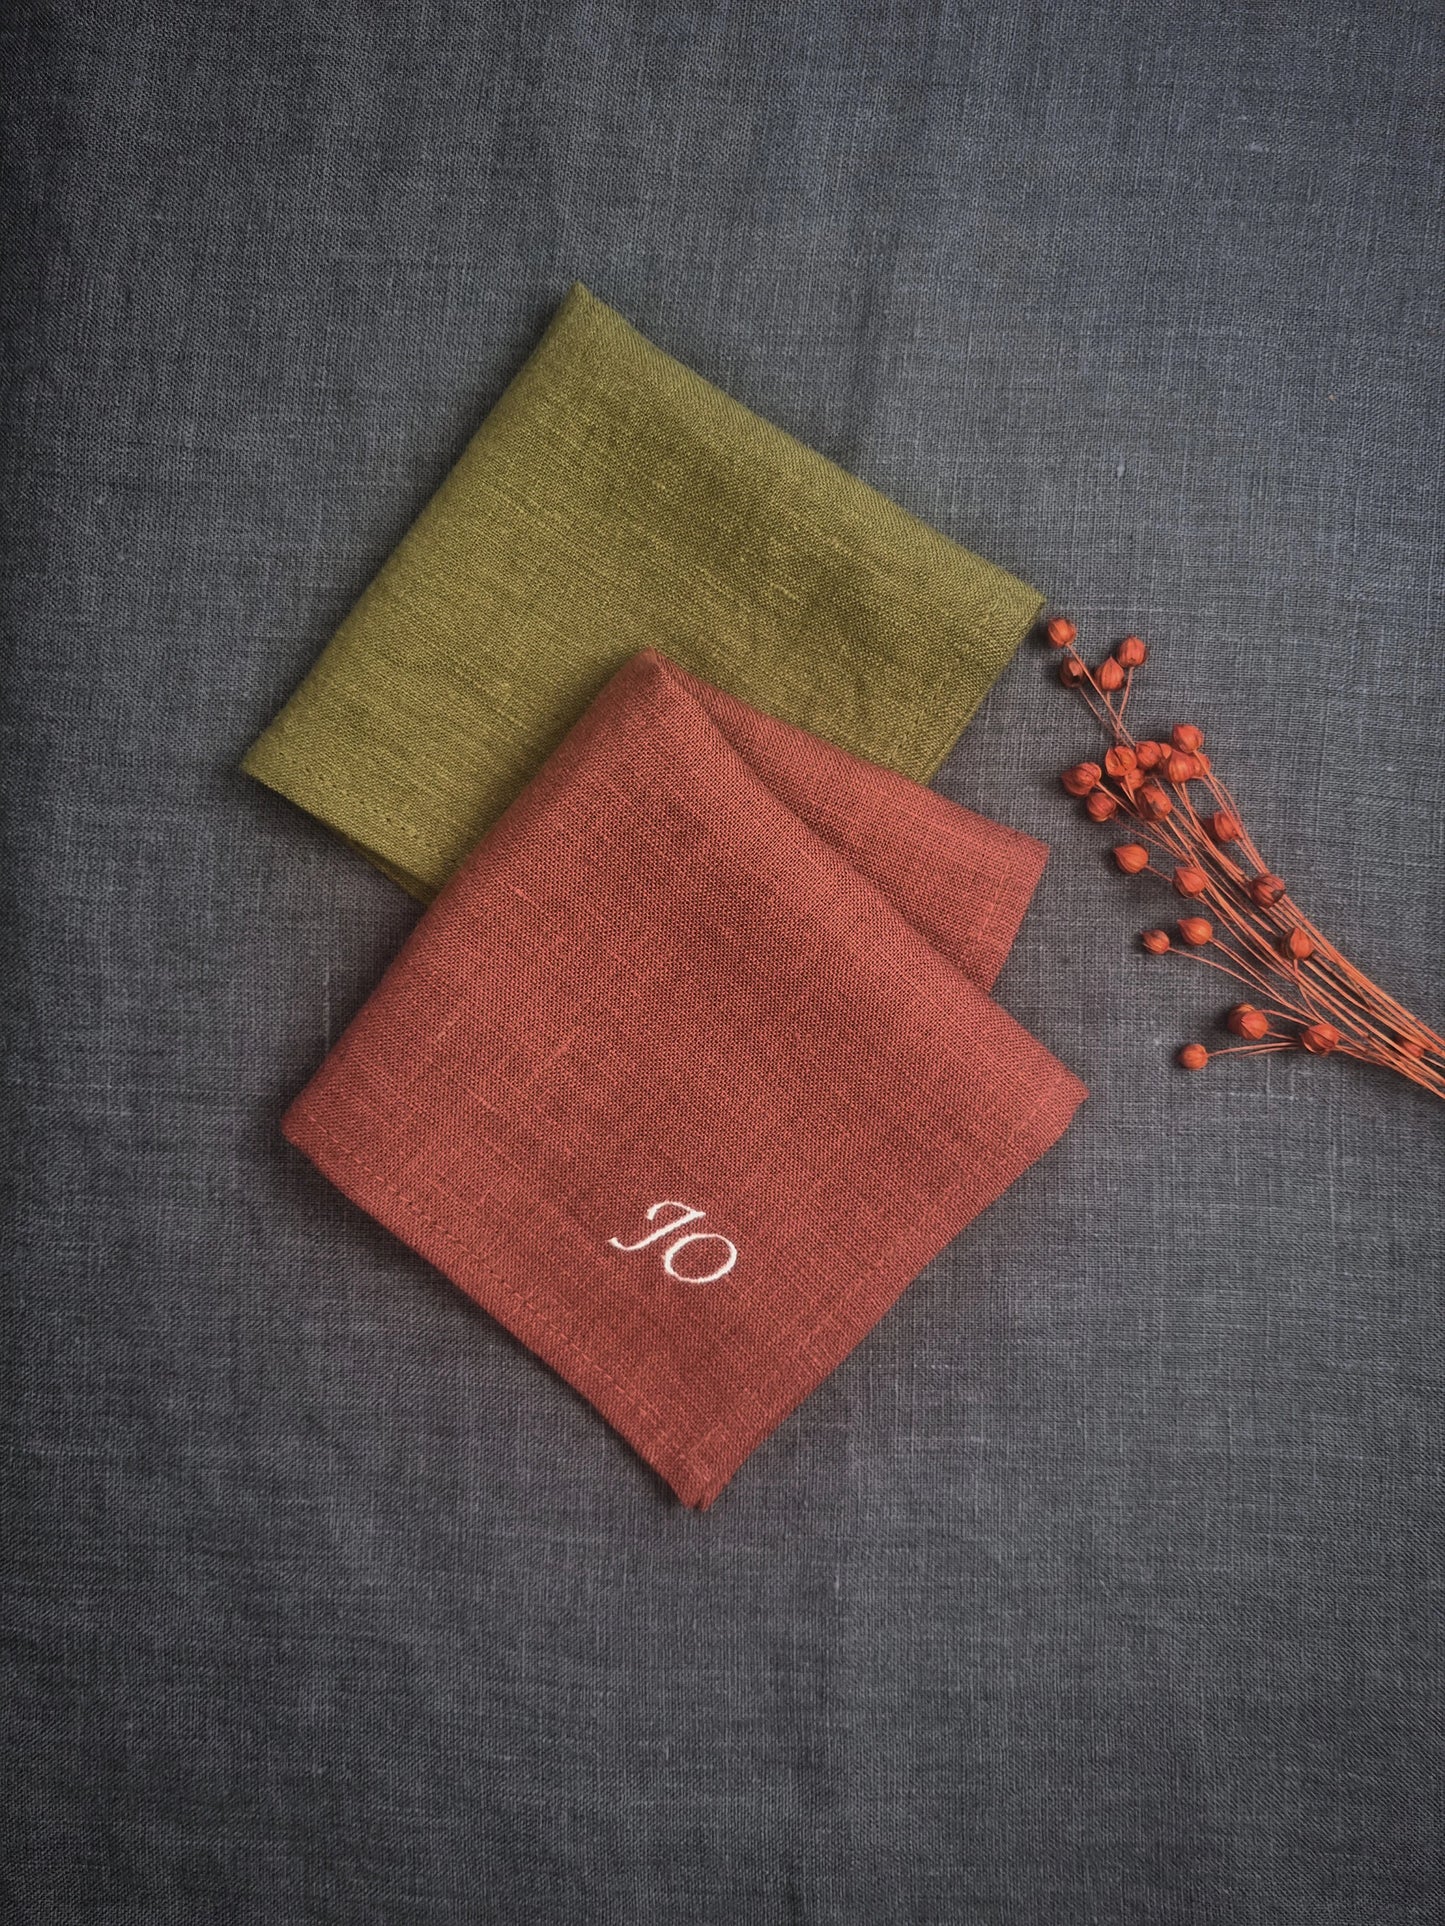 Personalised/Embroidered Natural linen handkerchiefs